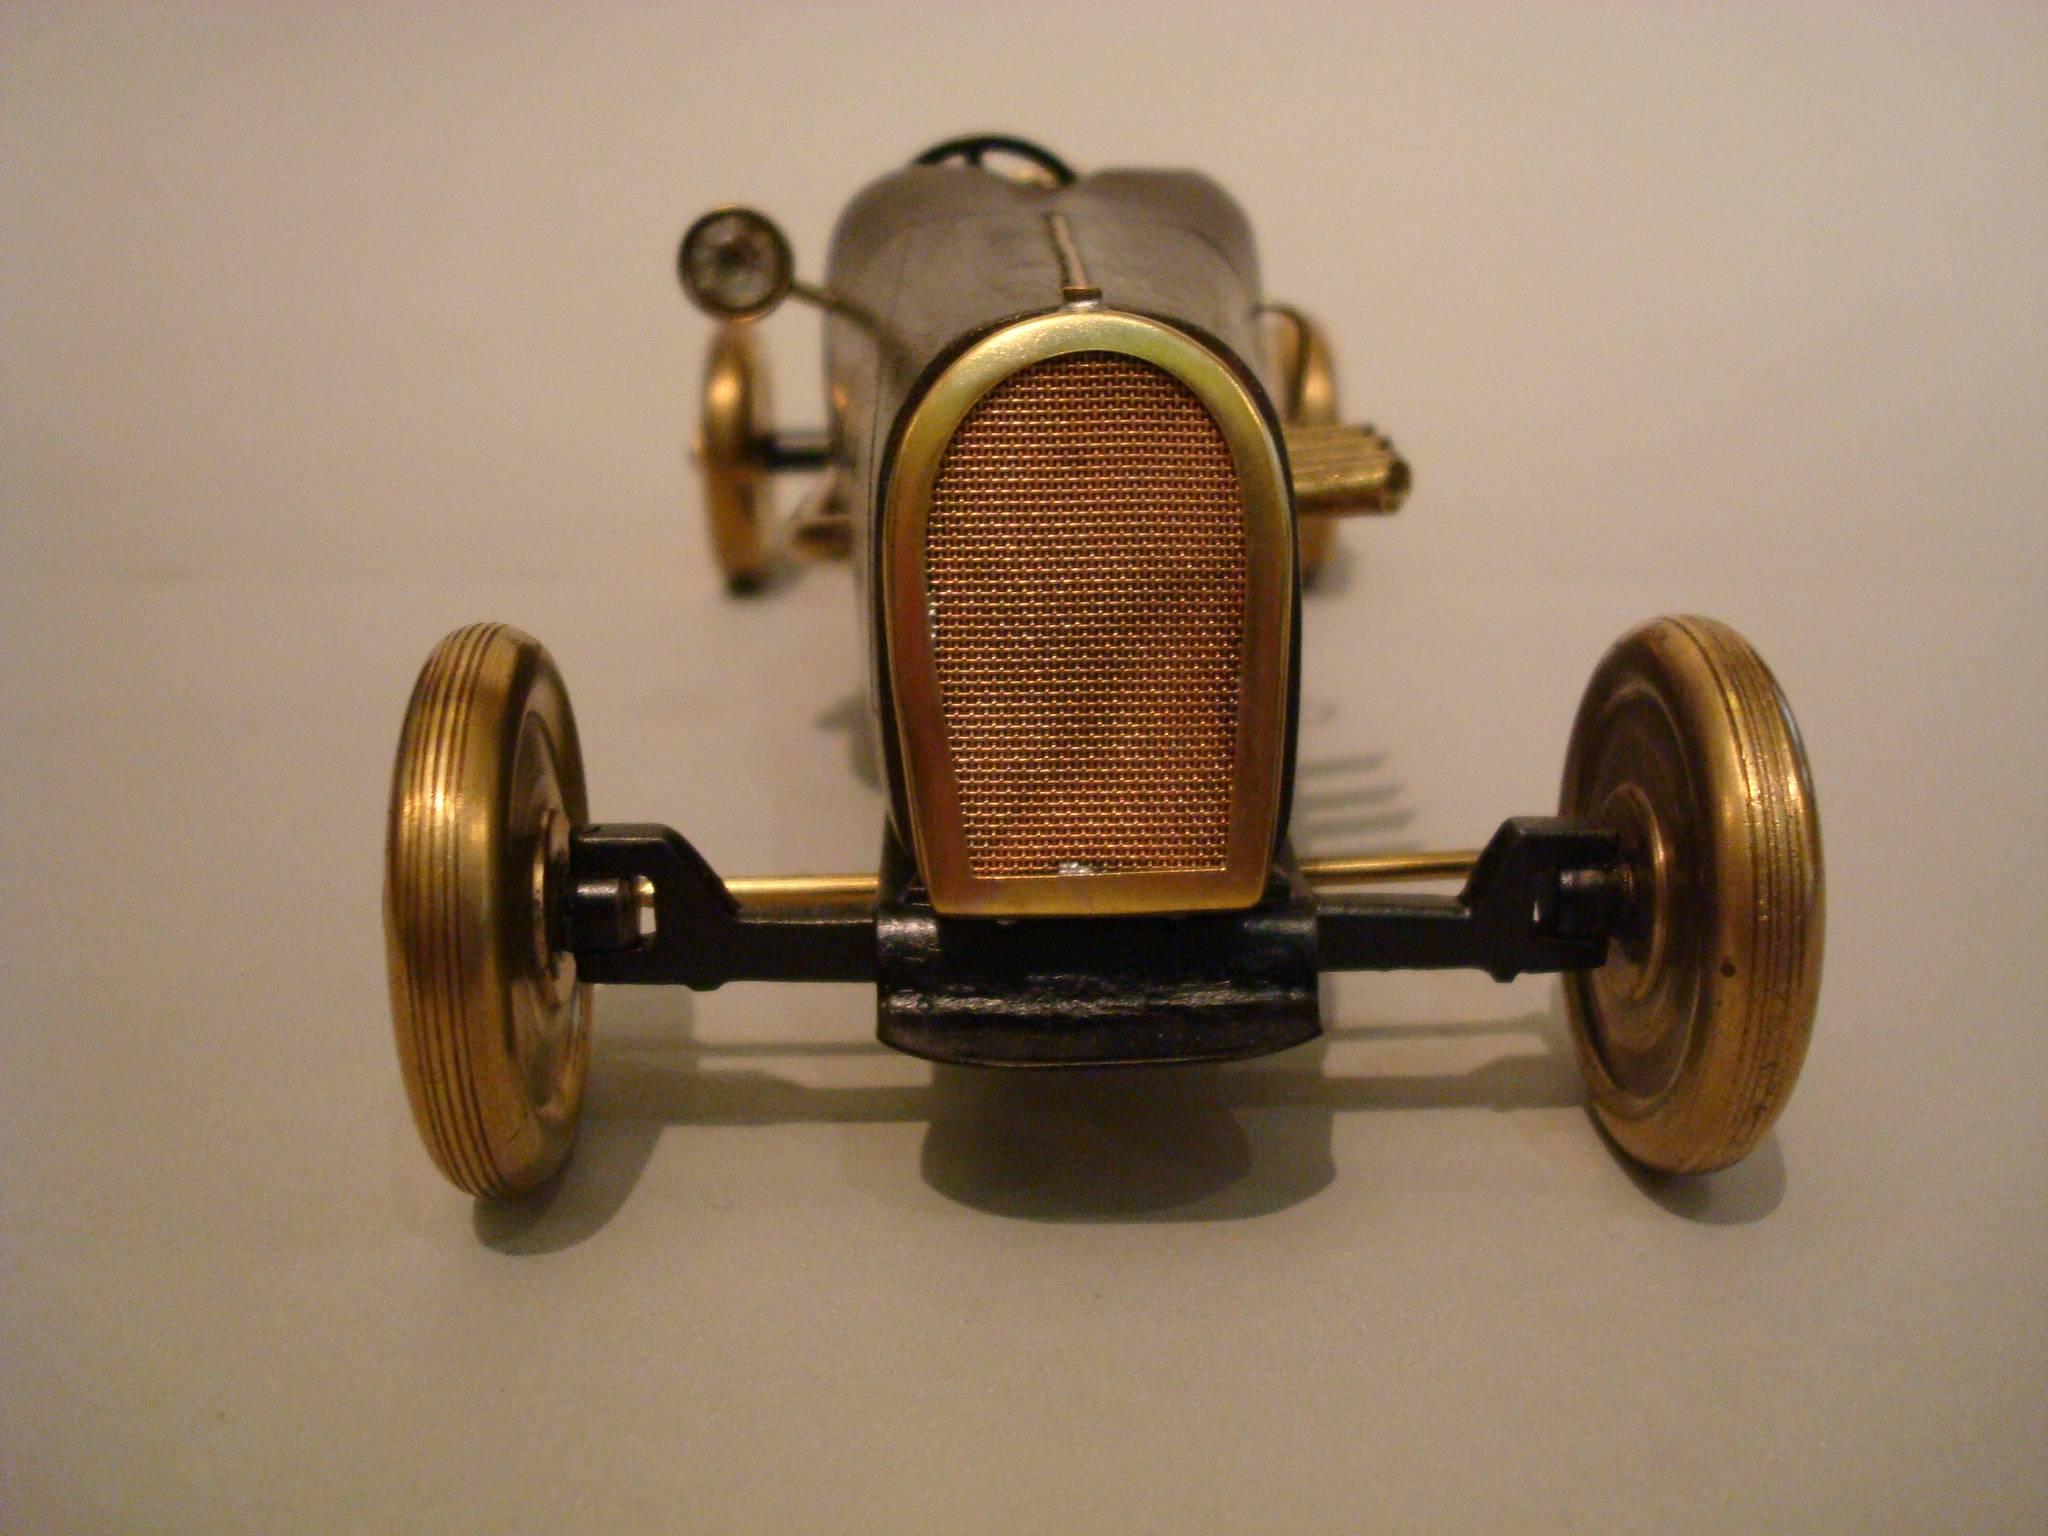 Hand-Carved Early Racing Car Model, Indianapolis Type, Brass and Wood, Automobilia For Sale